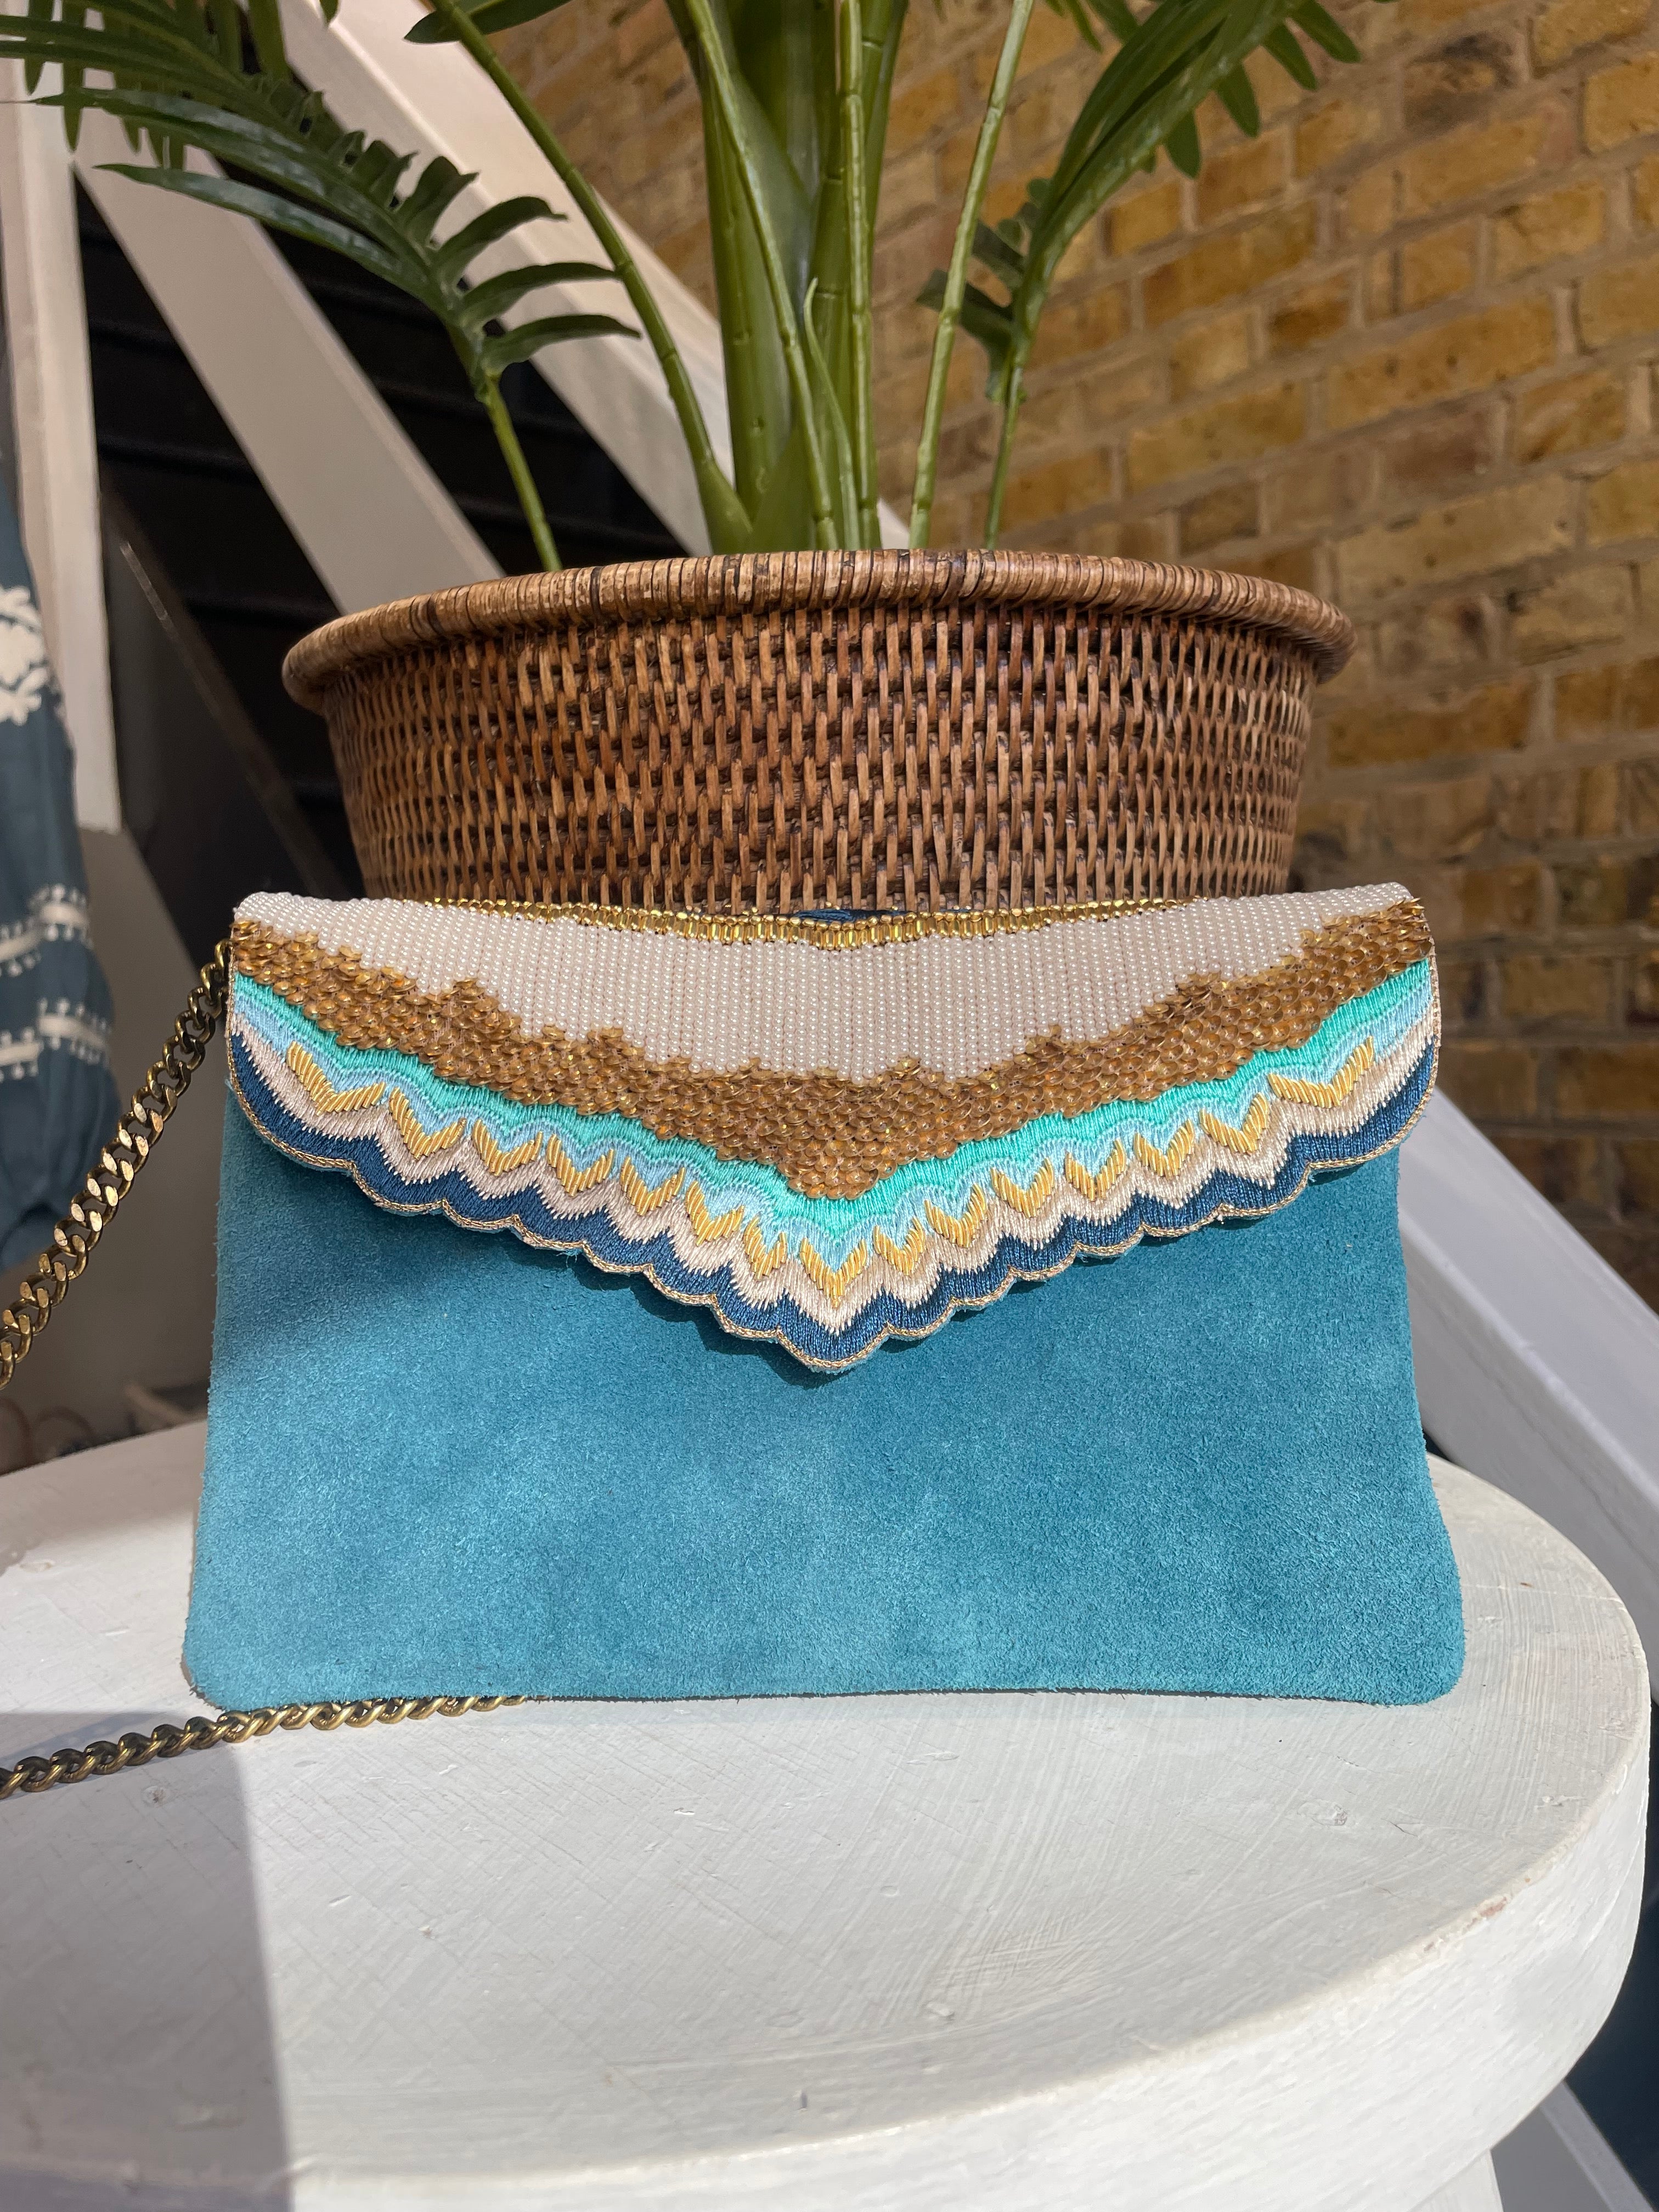 embroidered clutch bag in turquoise nahua official